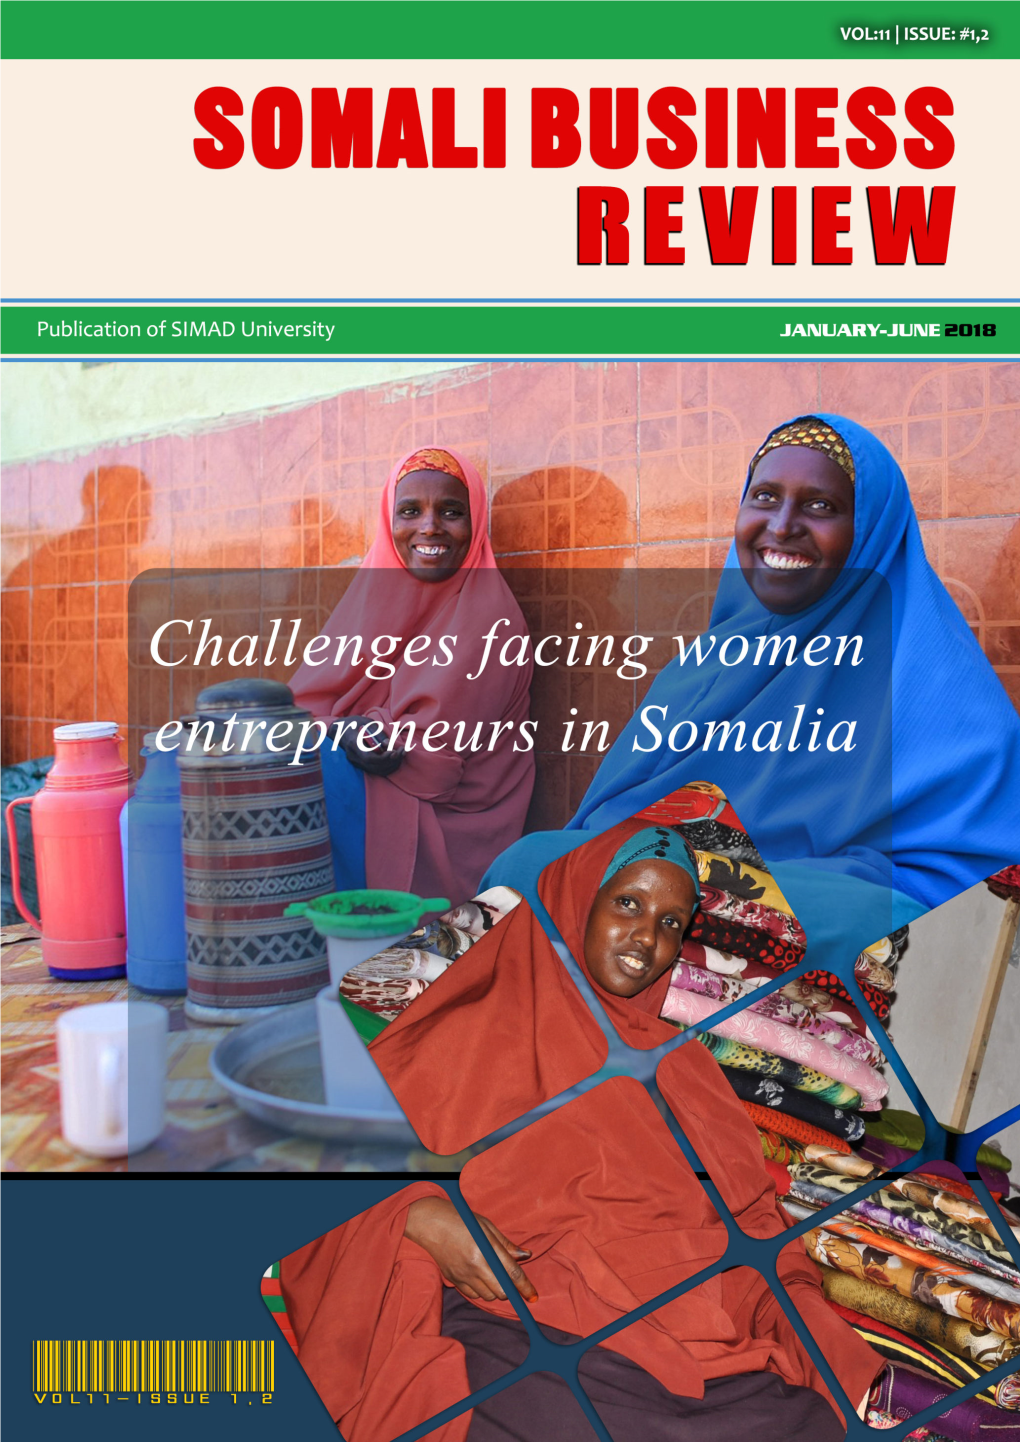 Somali Business Review Vol 11 Issue